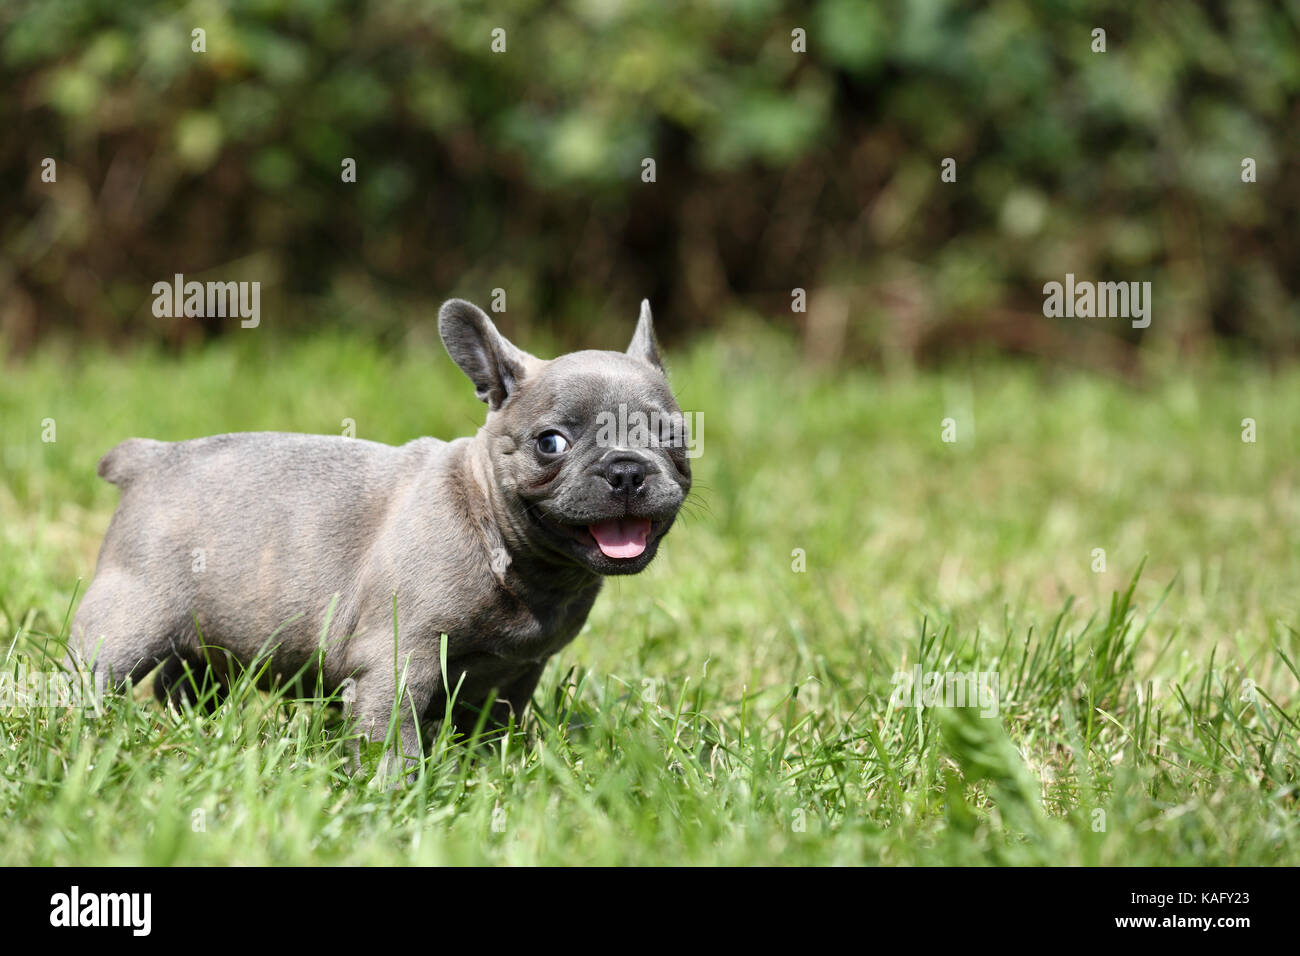 French Bulldog. Puppy (6 weeks old) standing in grass, squeezing its eye. Germany Stock Photo